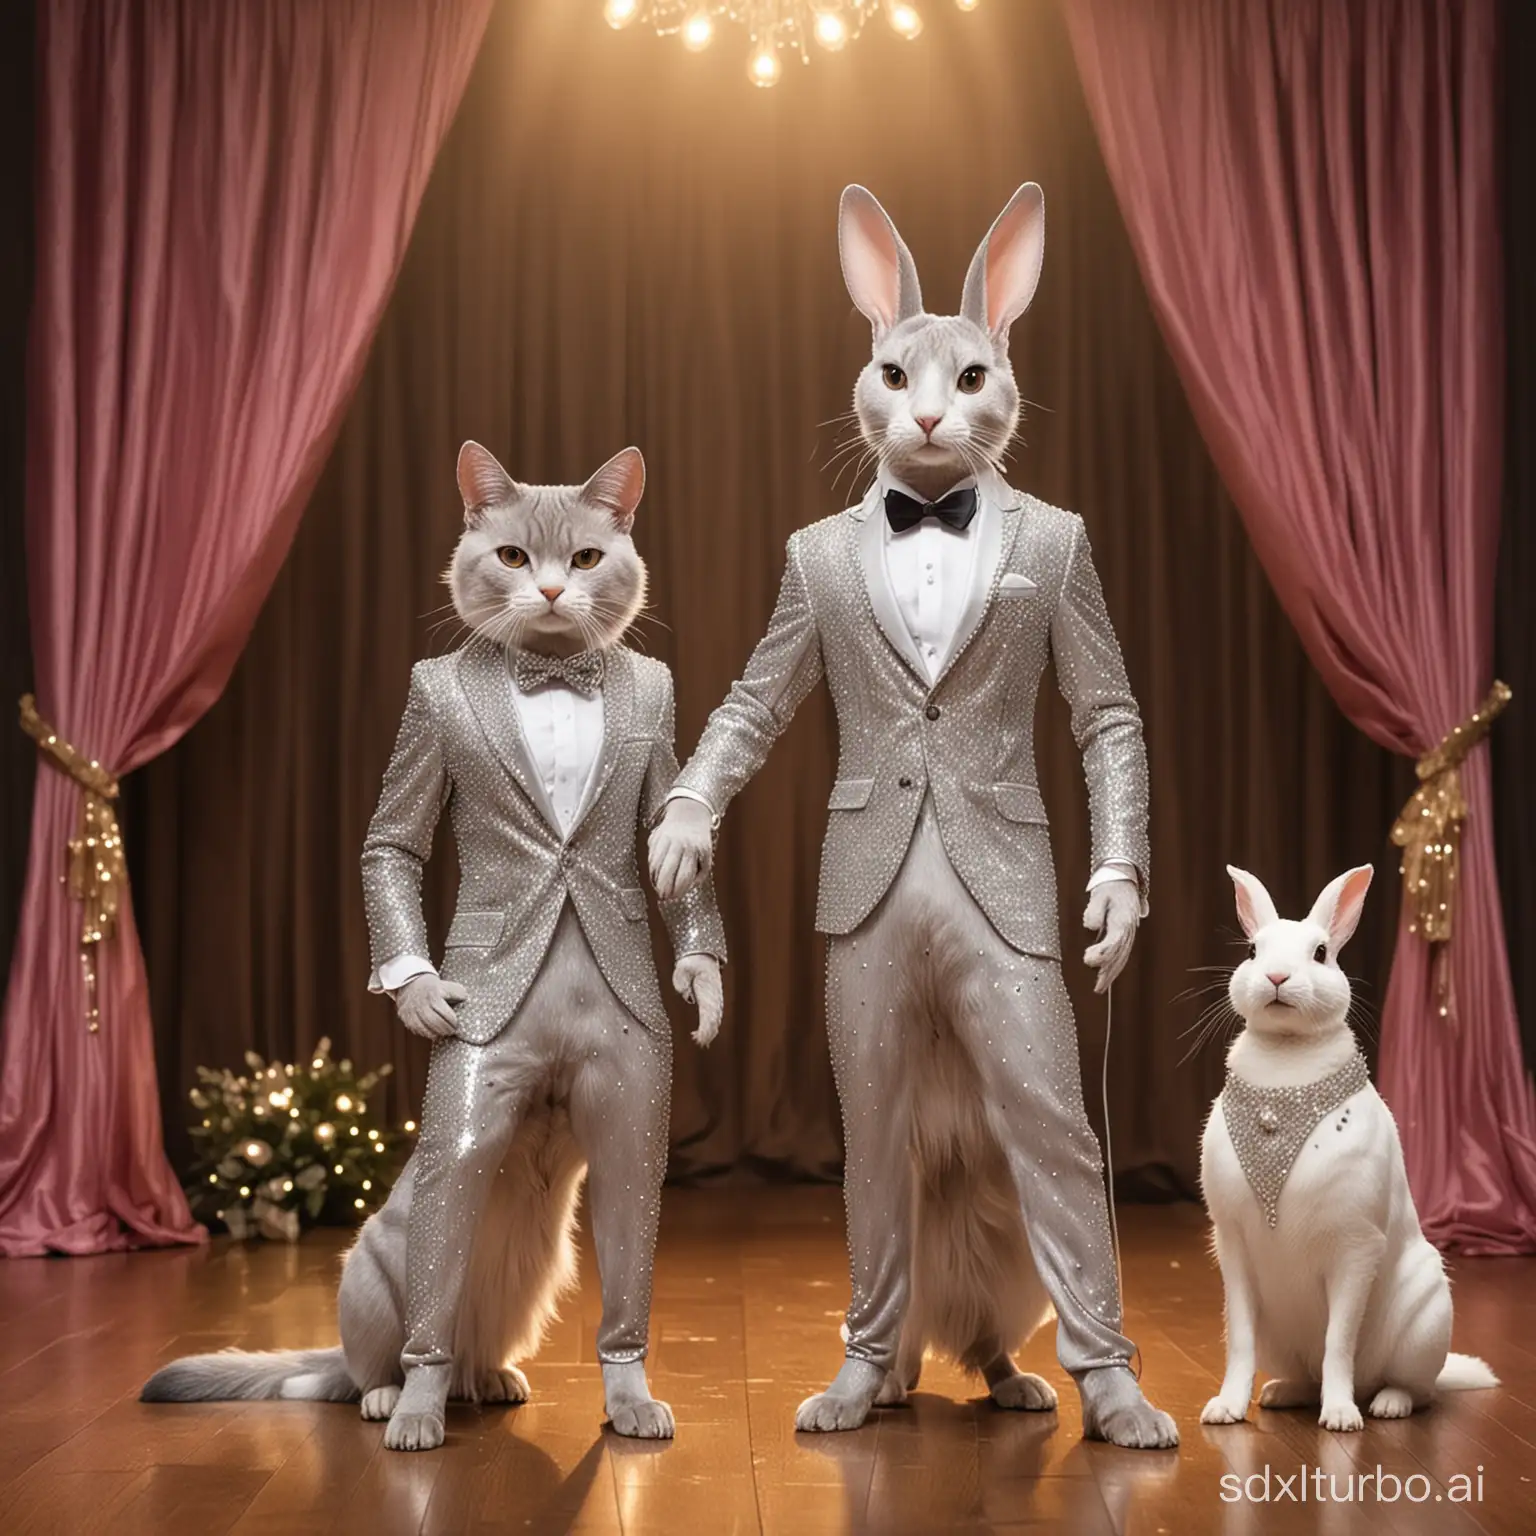 Slim beautiful standing lady cat wearing a bling bling gown, a beautiful lady rabbit standing wear a bling bling gown, a male standing dog wear a bling bling suit,  they are on a beautiful stage with a lots of lights